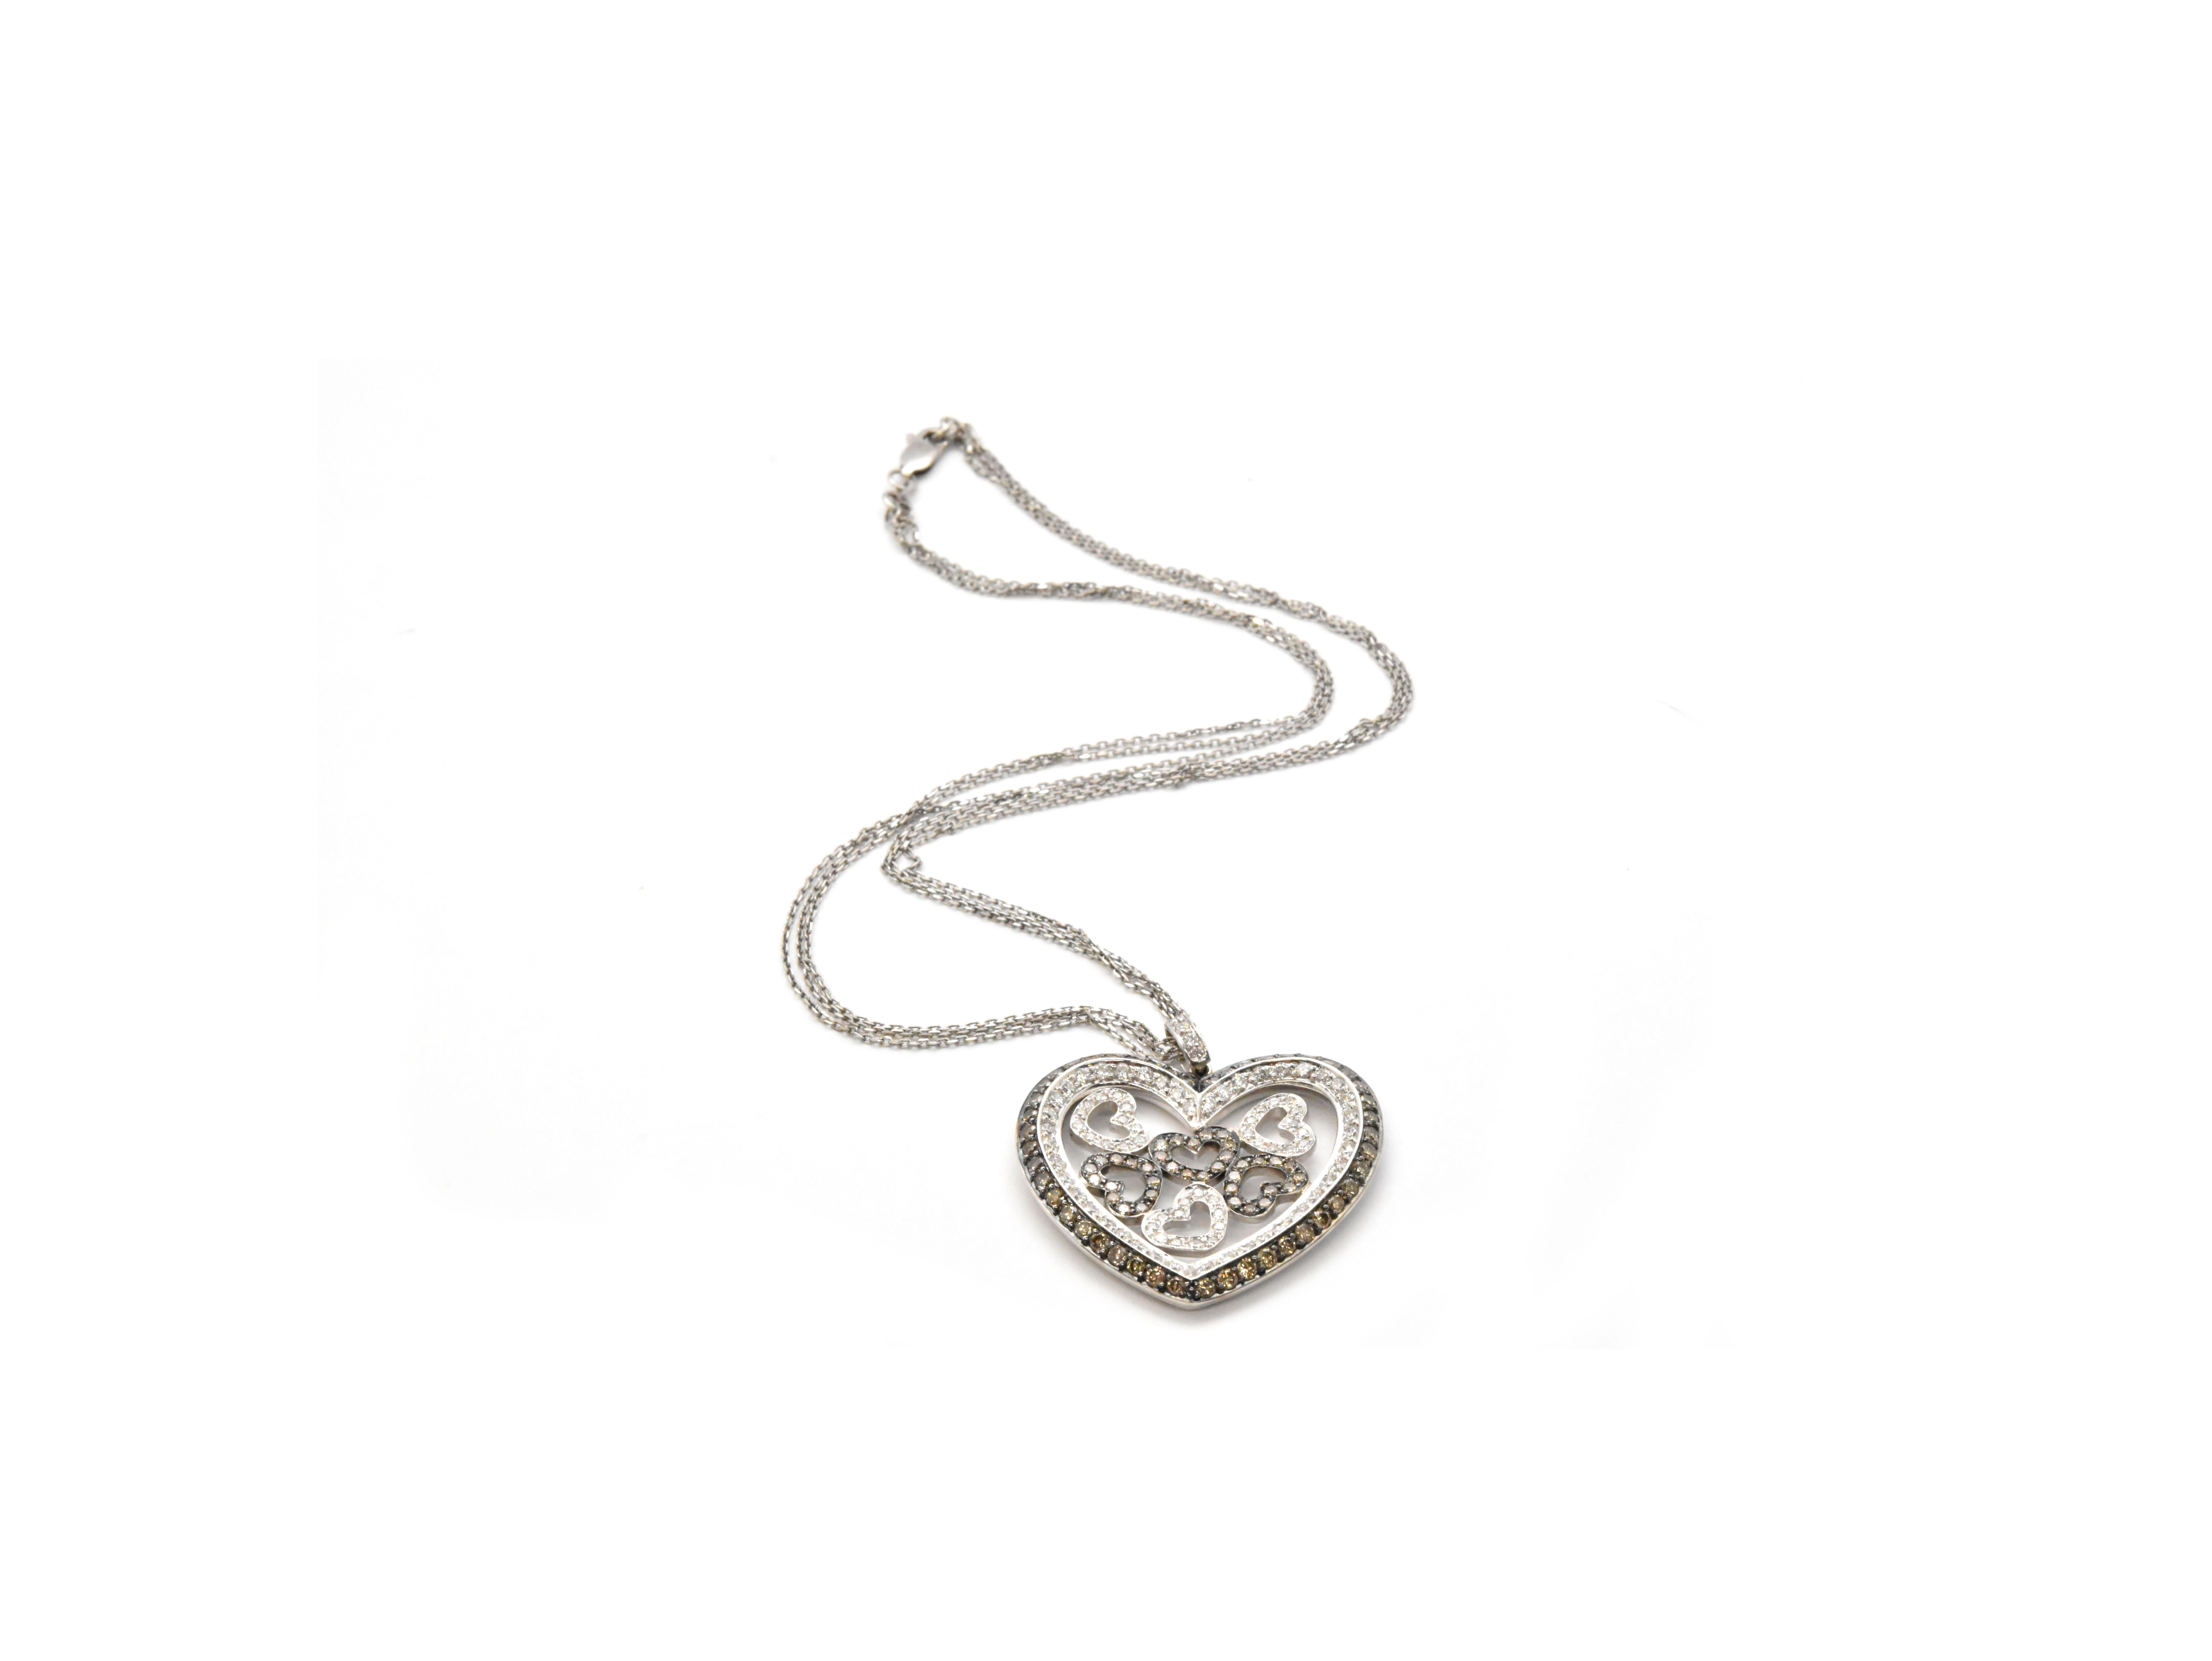 Contemporary 14 Karat White Gold and White/Champagne Diamond Heart Necklace 2.92 Carat